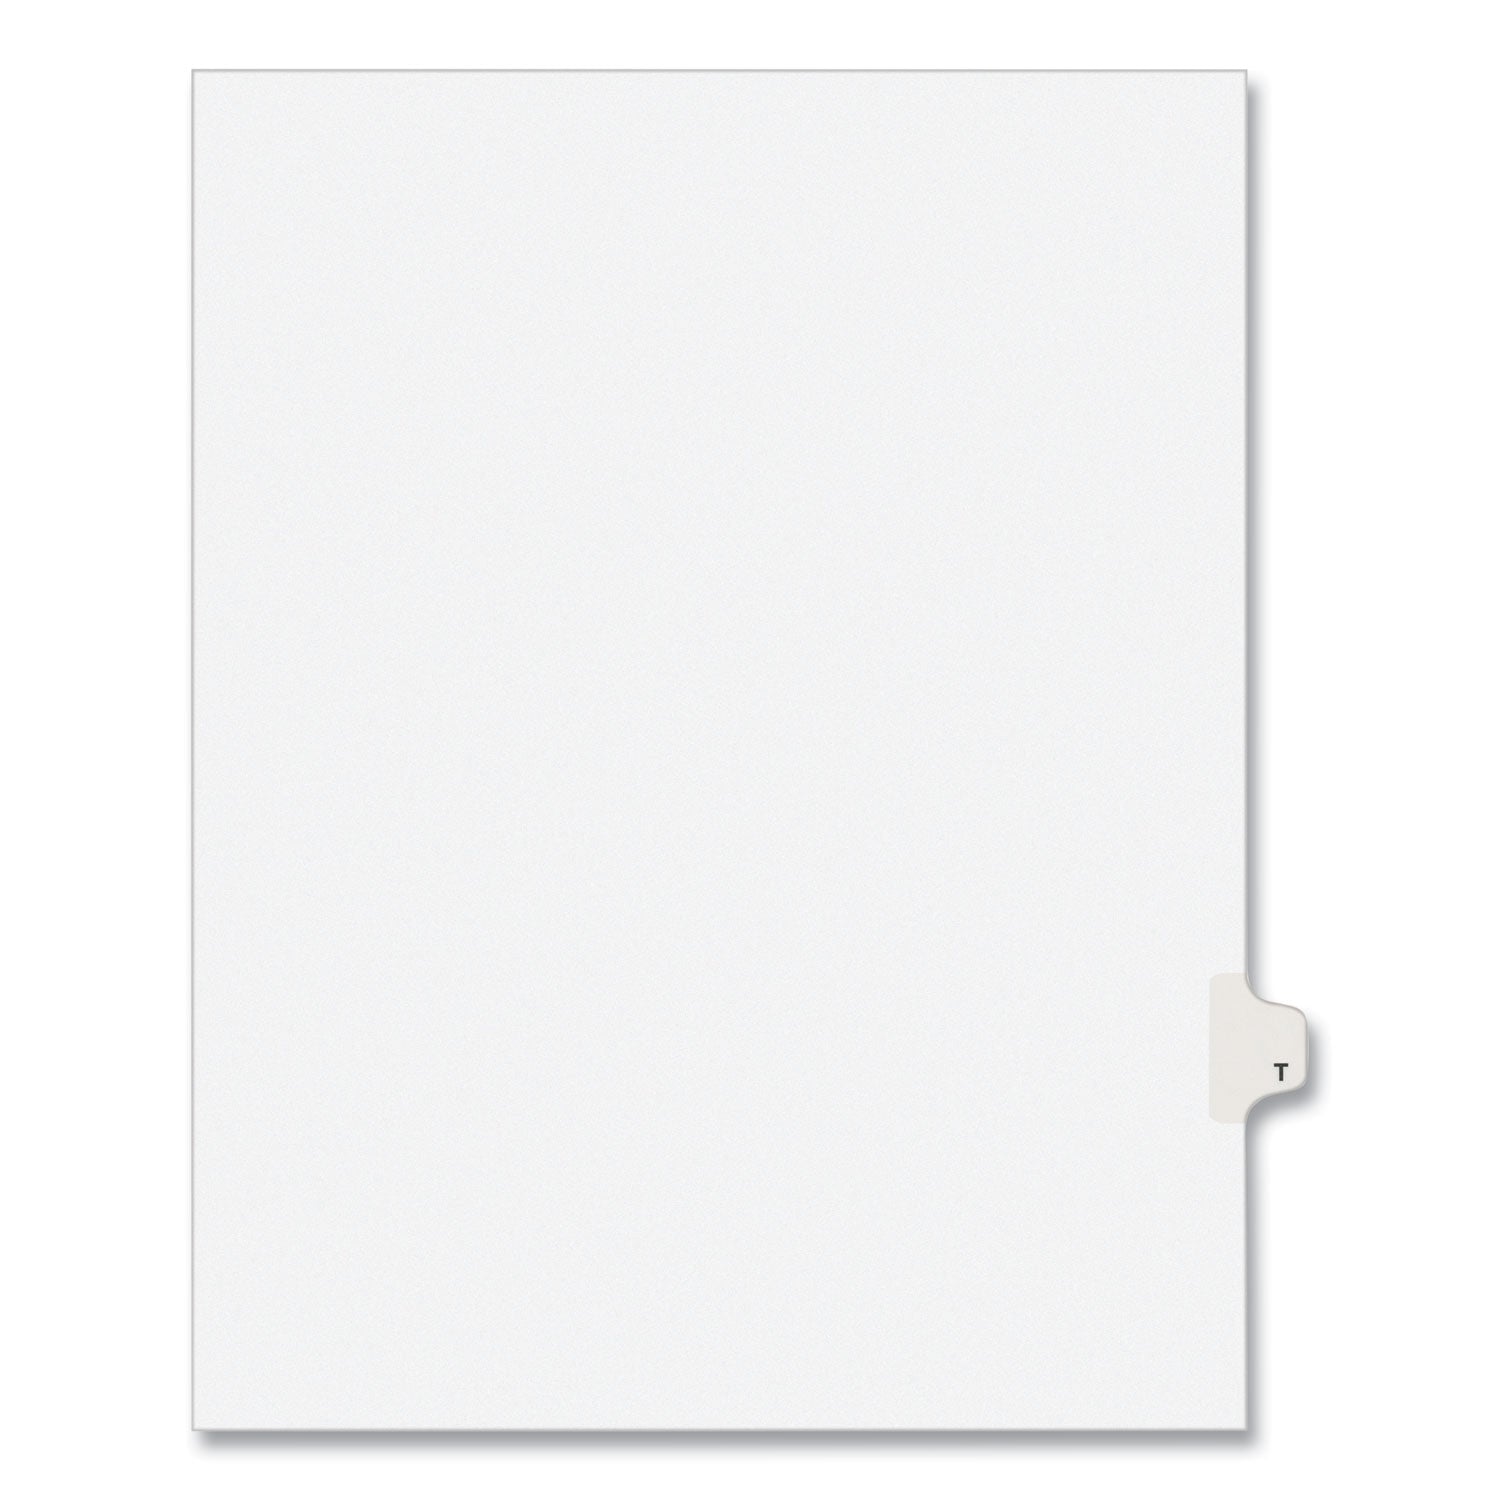 Preprinted Legal Exhibit Side Tab Index Dividers, Avery Style, 26-Tab, T, 11 x 8.5, White, 25/Pack, (1420) - 